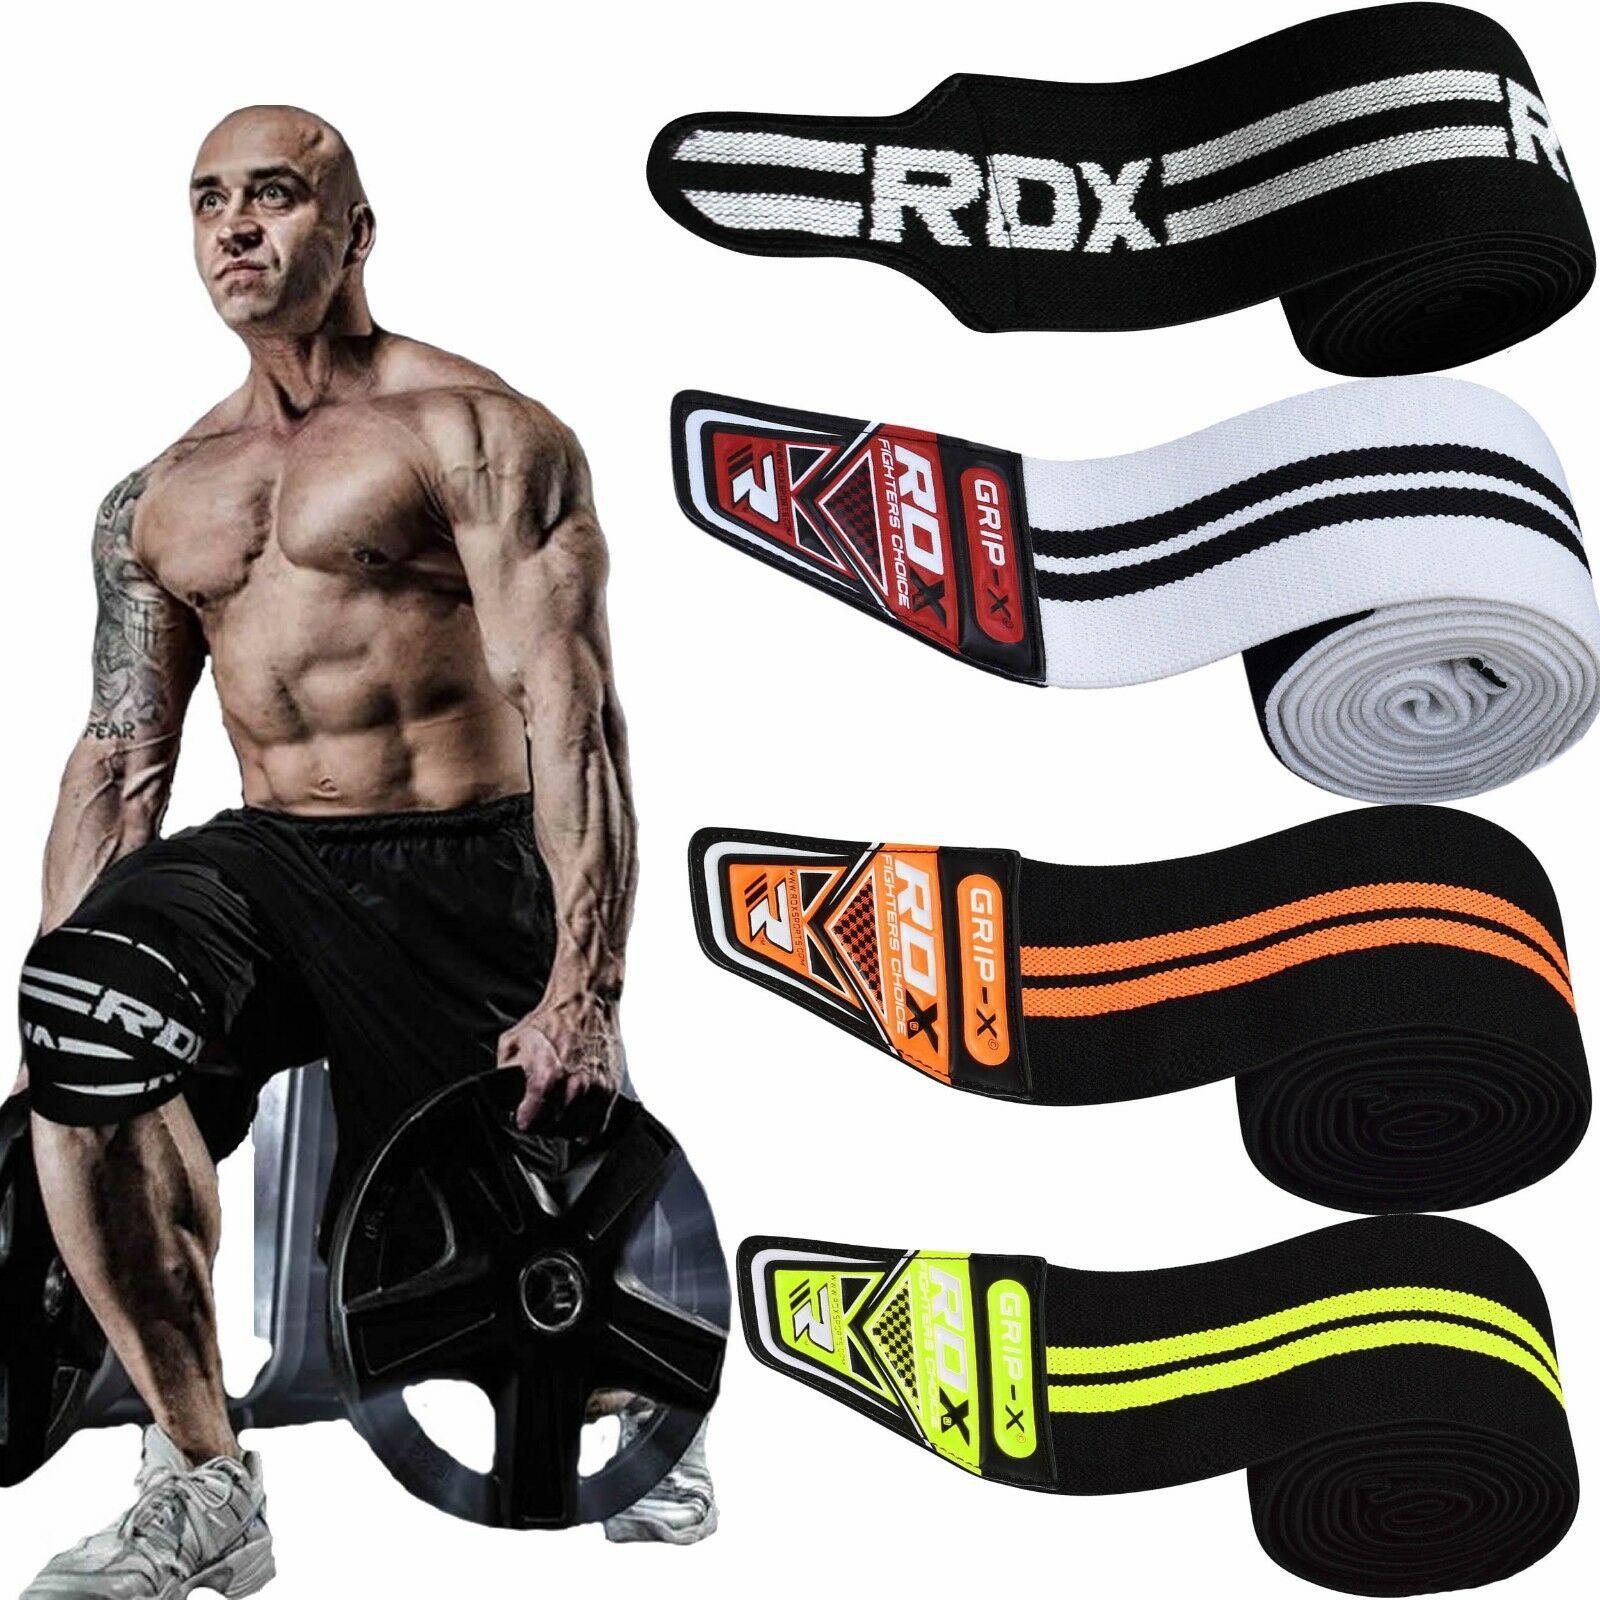 HEXA PRO HEAVY DUTY POWERLIFTING KNEE WRAPS BODYBUILDING/Weight lifting STRAPS